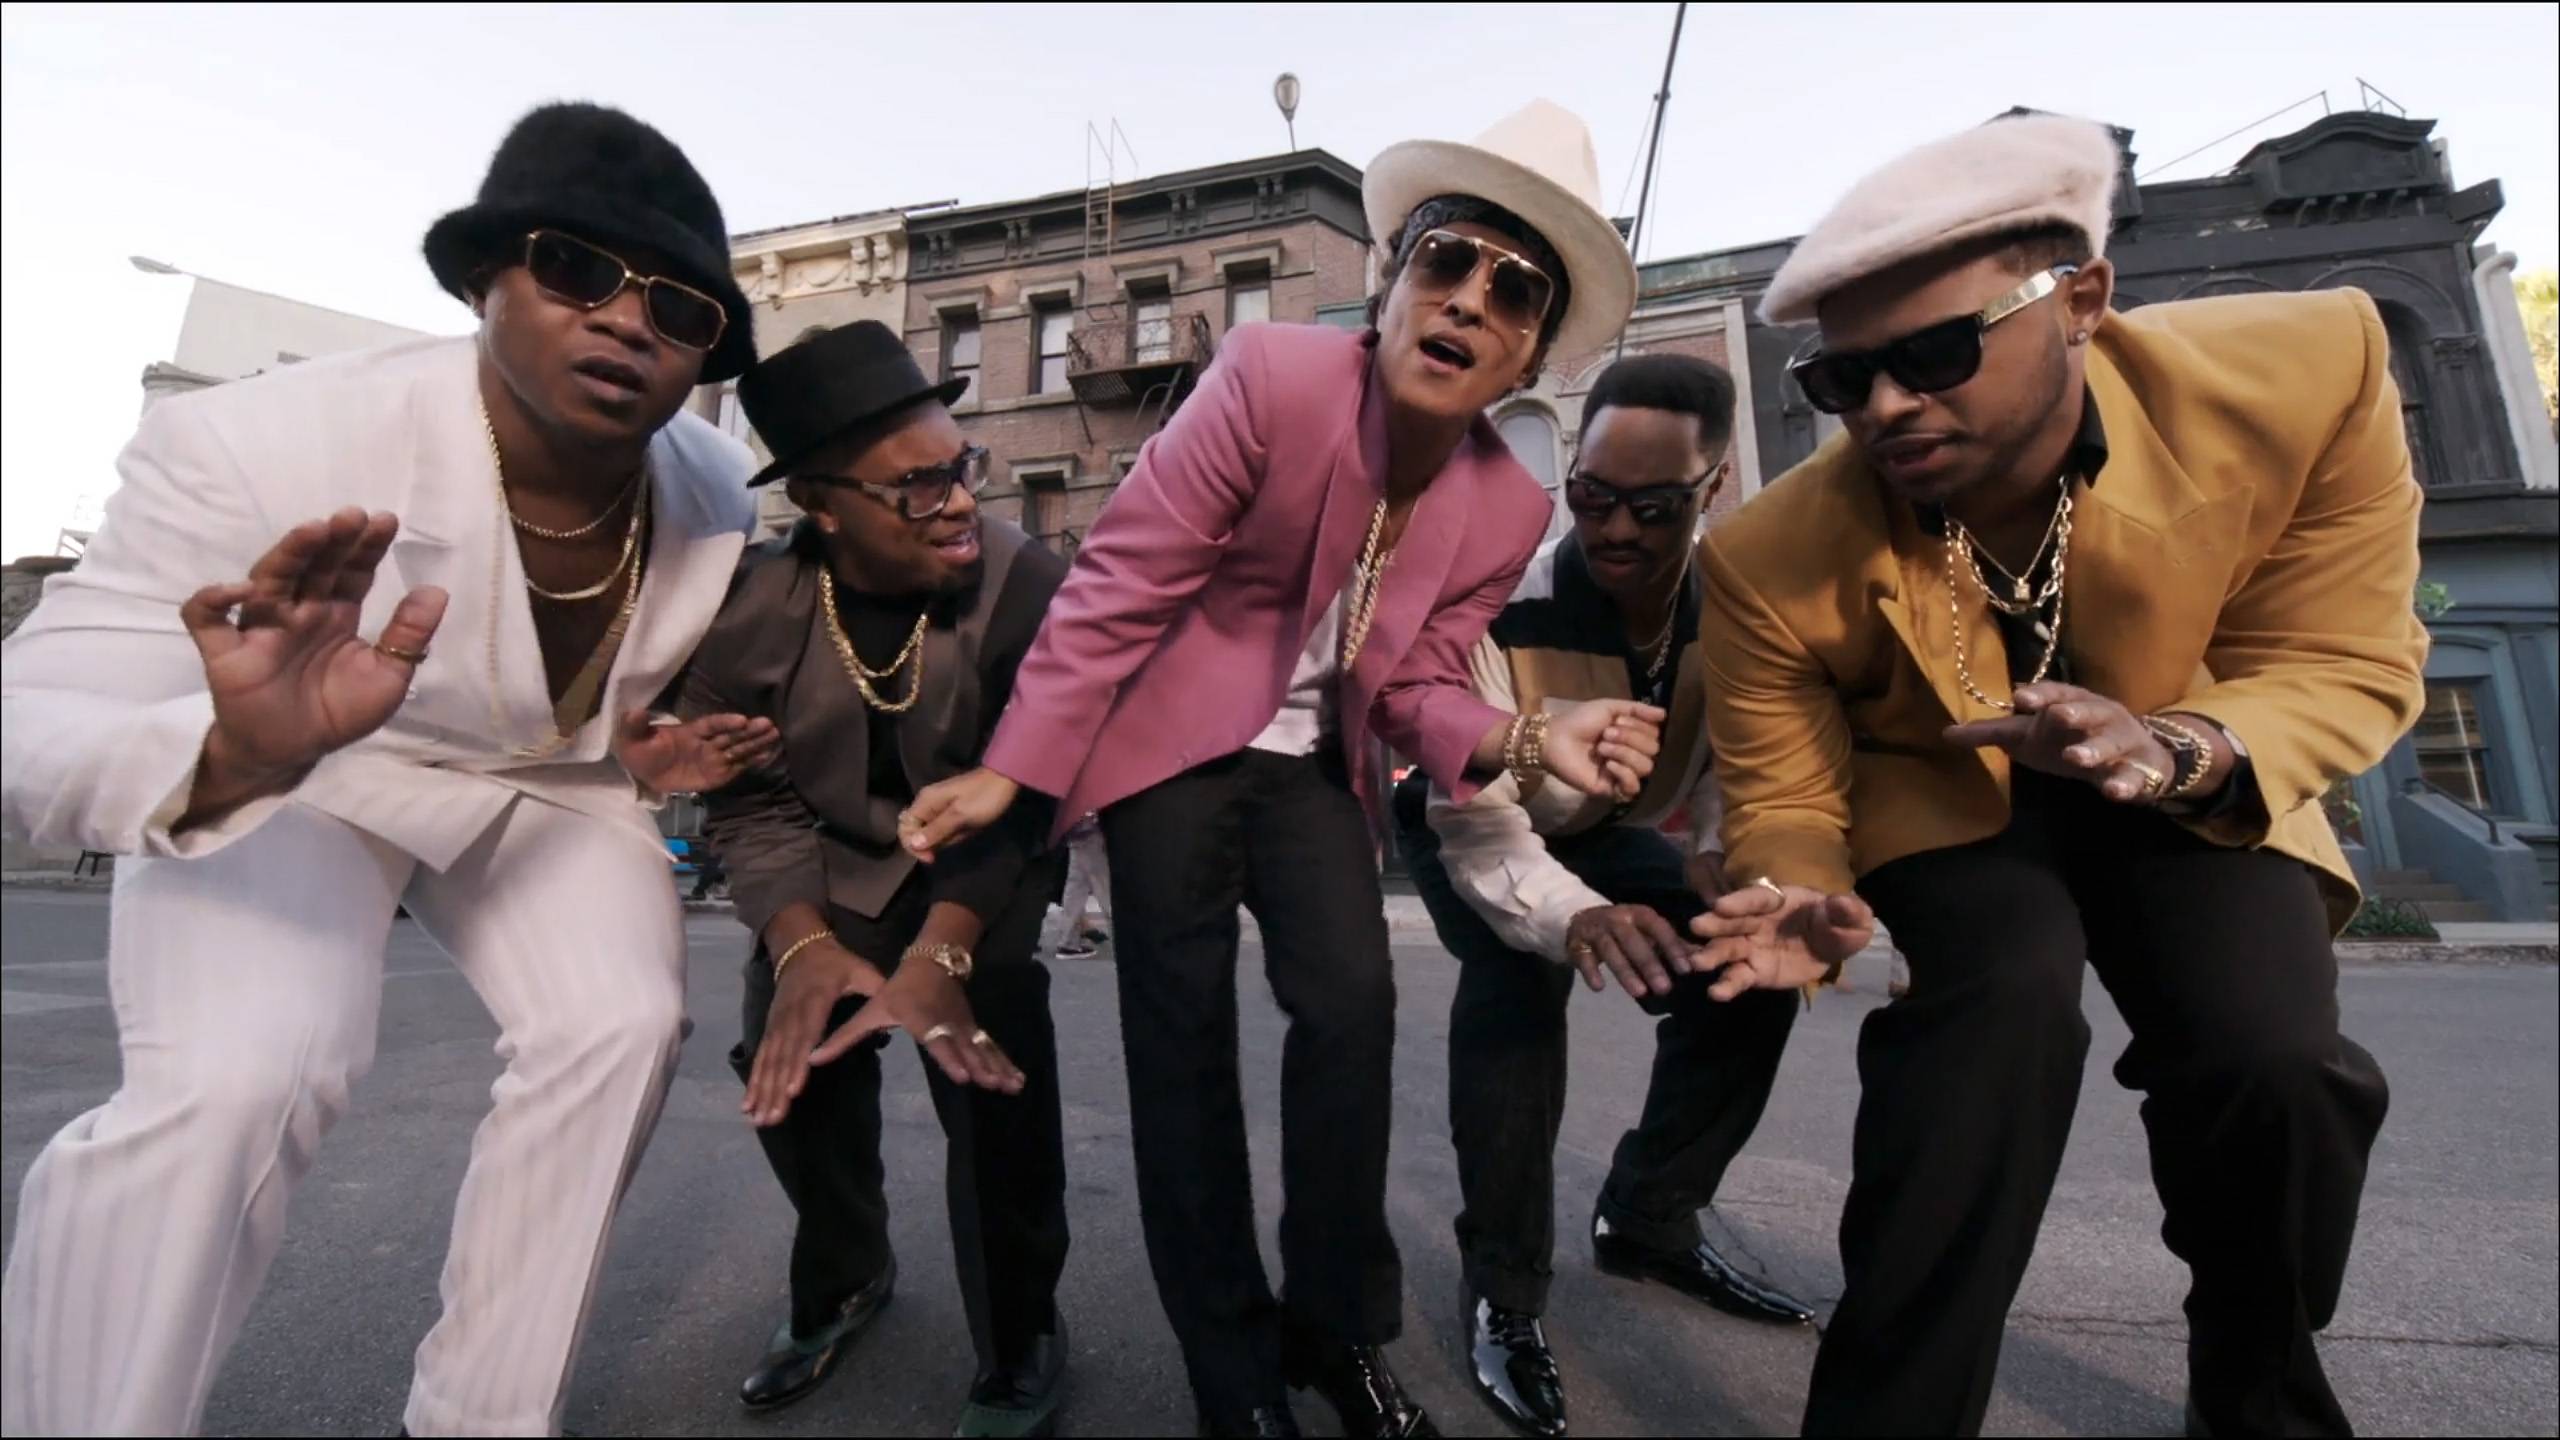 Mark Ronson ft. Bruno Mars – 'Uptown Funk' - This funky record is fun yet hip. Its retro feel has made it something cool to rock out to no matter what your age.&nbsp; (Photo: Sony Music Entertainment UK Ltd.)